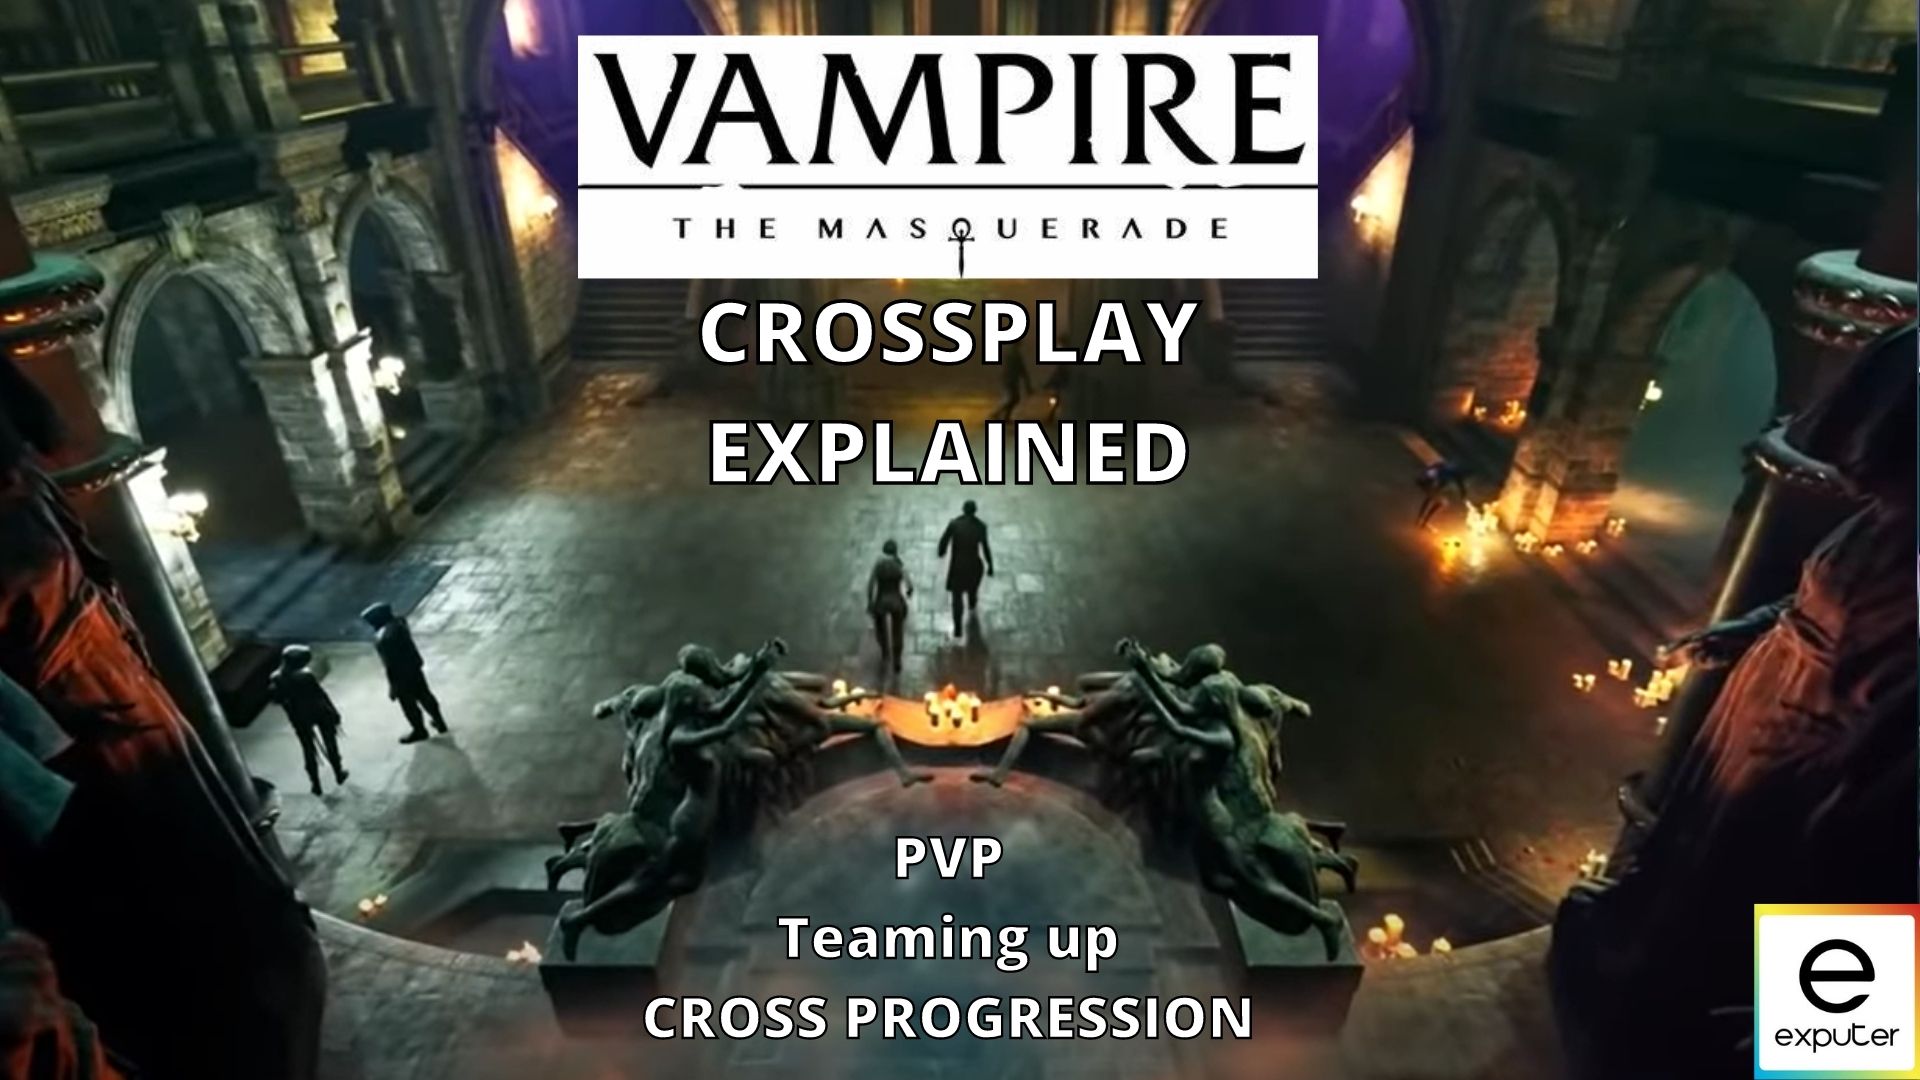 Bloodhunt crossplay and cross-progress explained